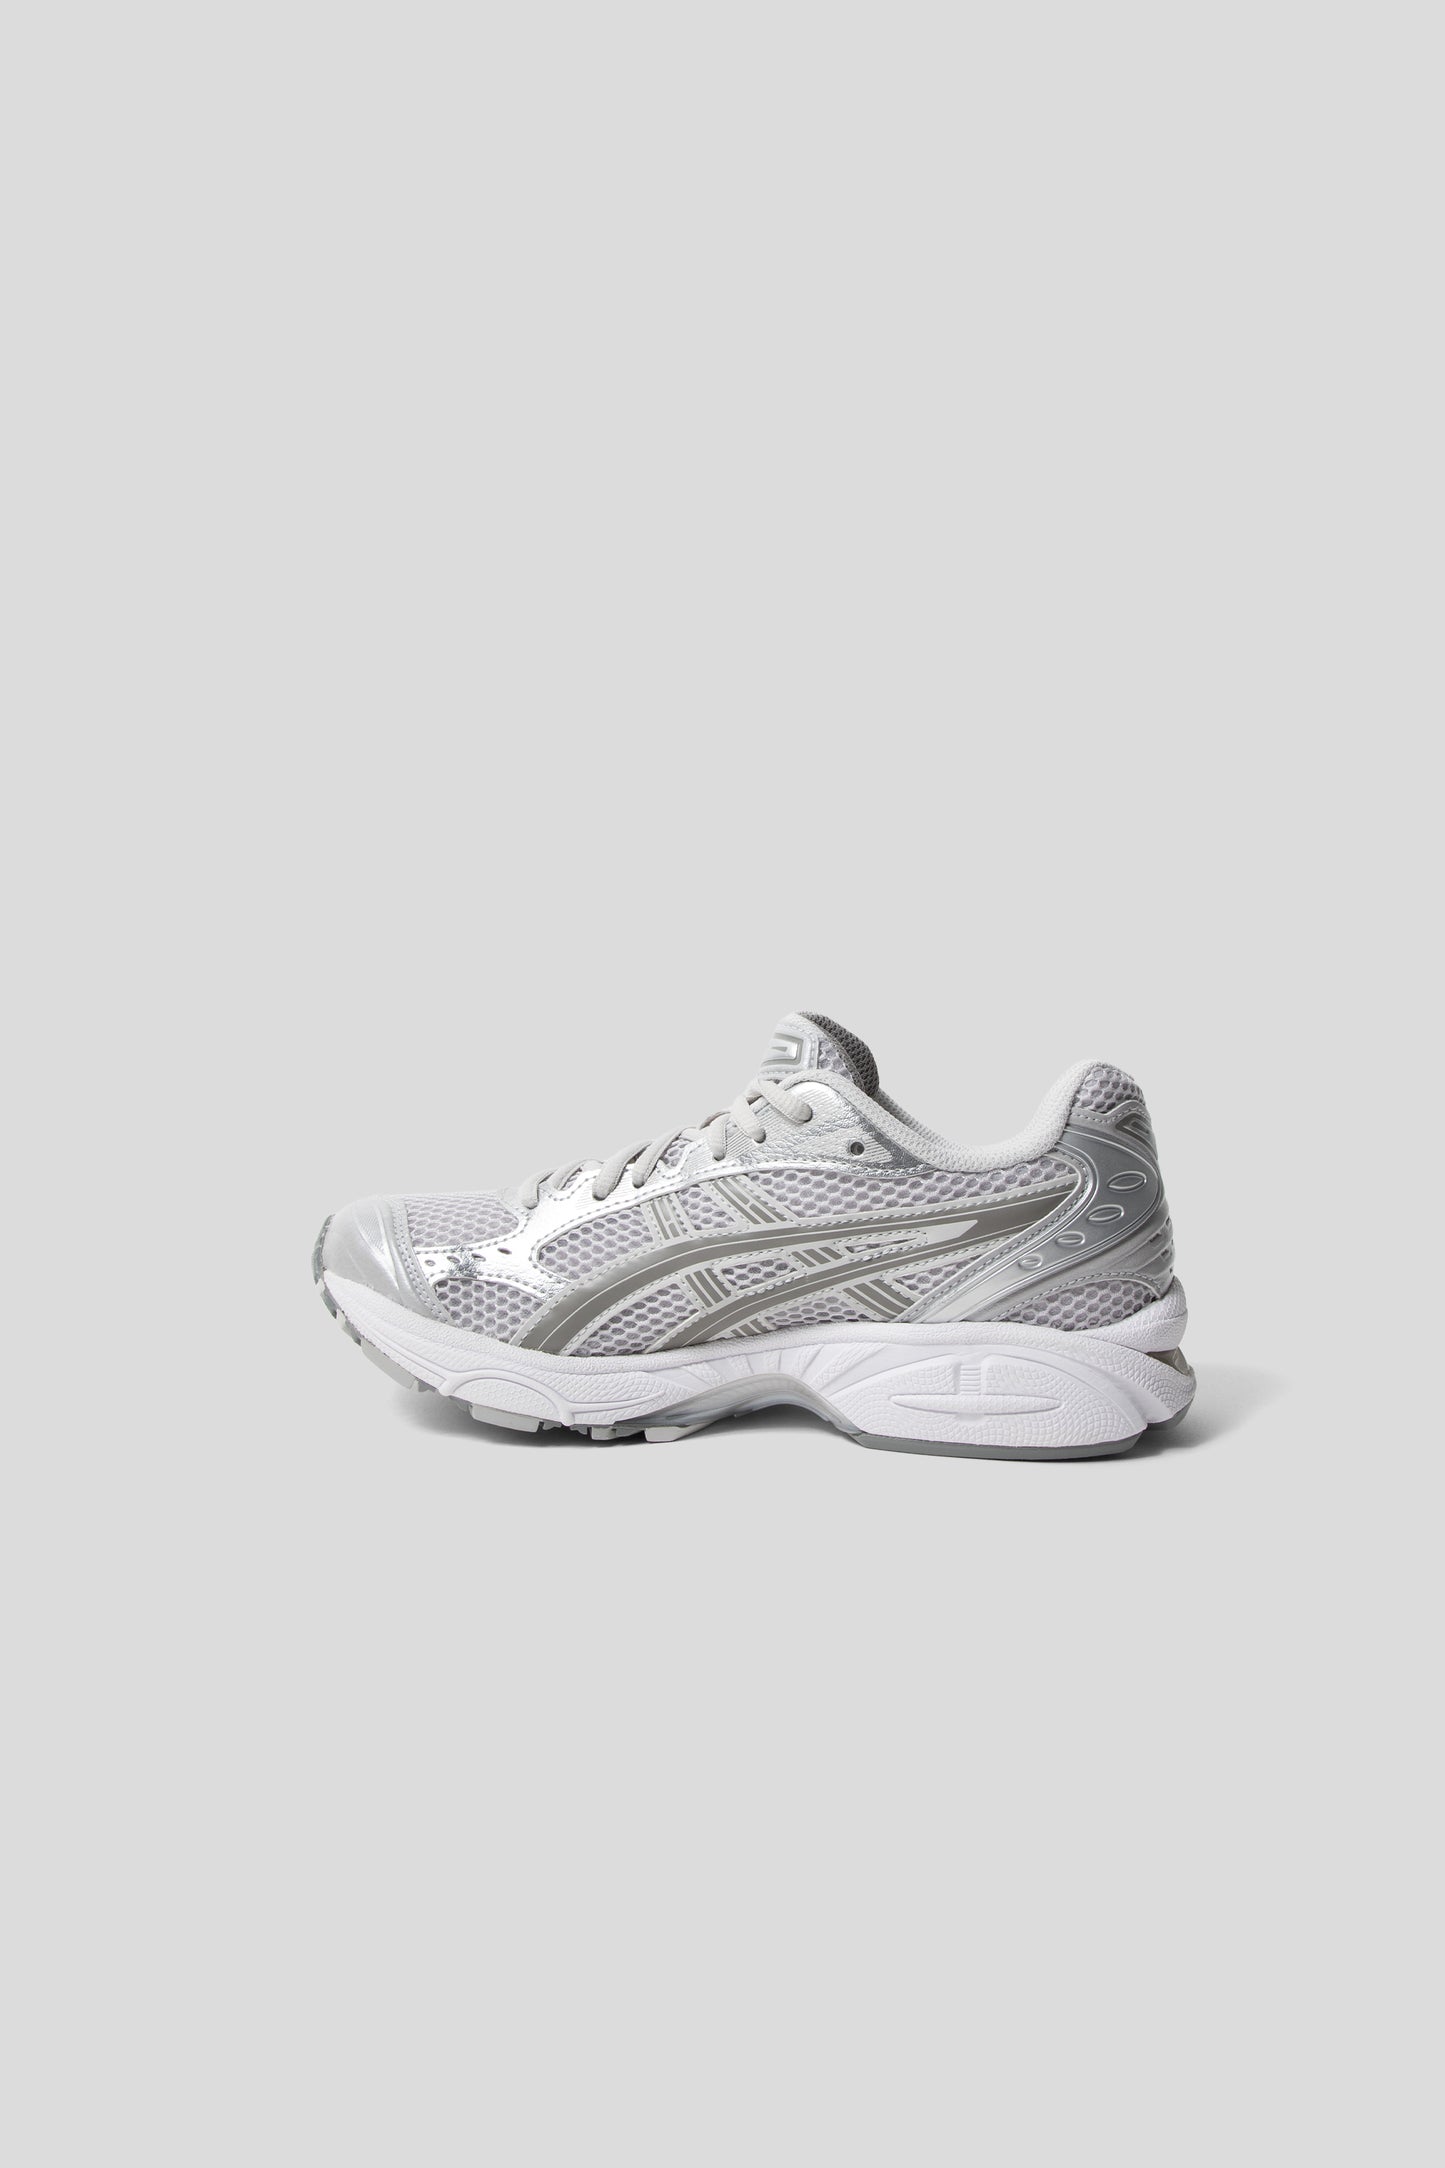 Asics Gel-Kayano 14 Shoes in Cloud Grey and Clay Grey